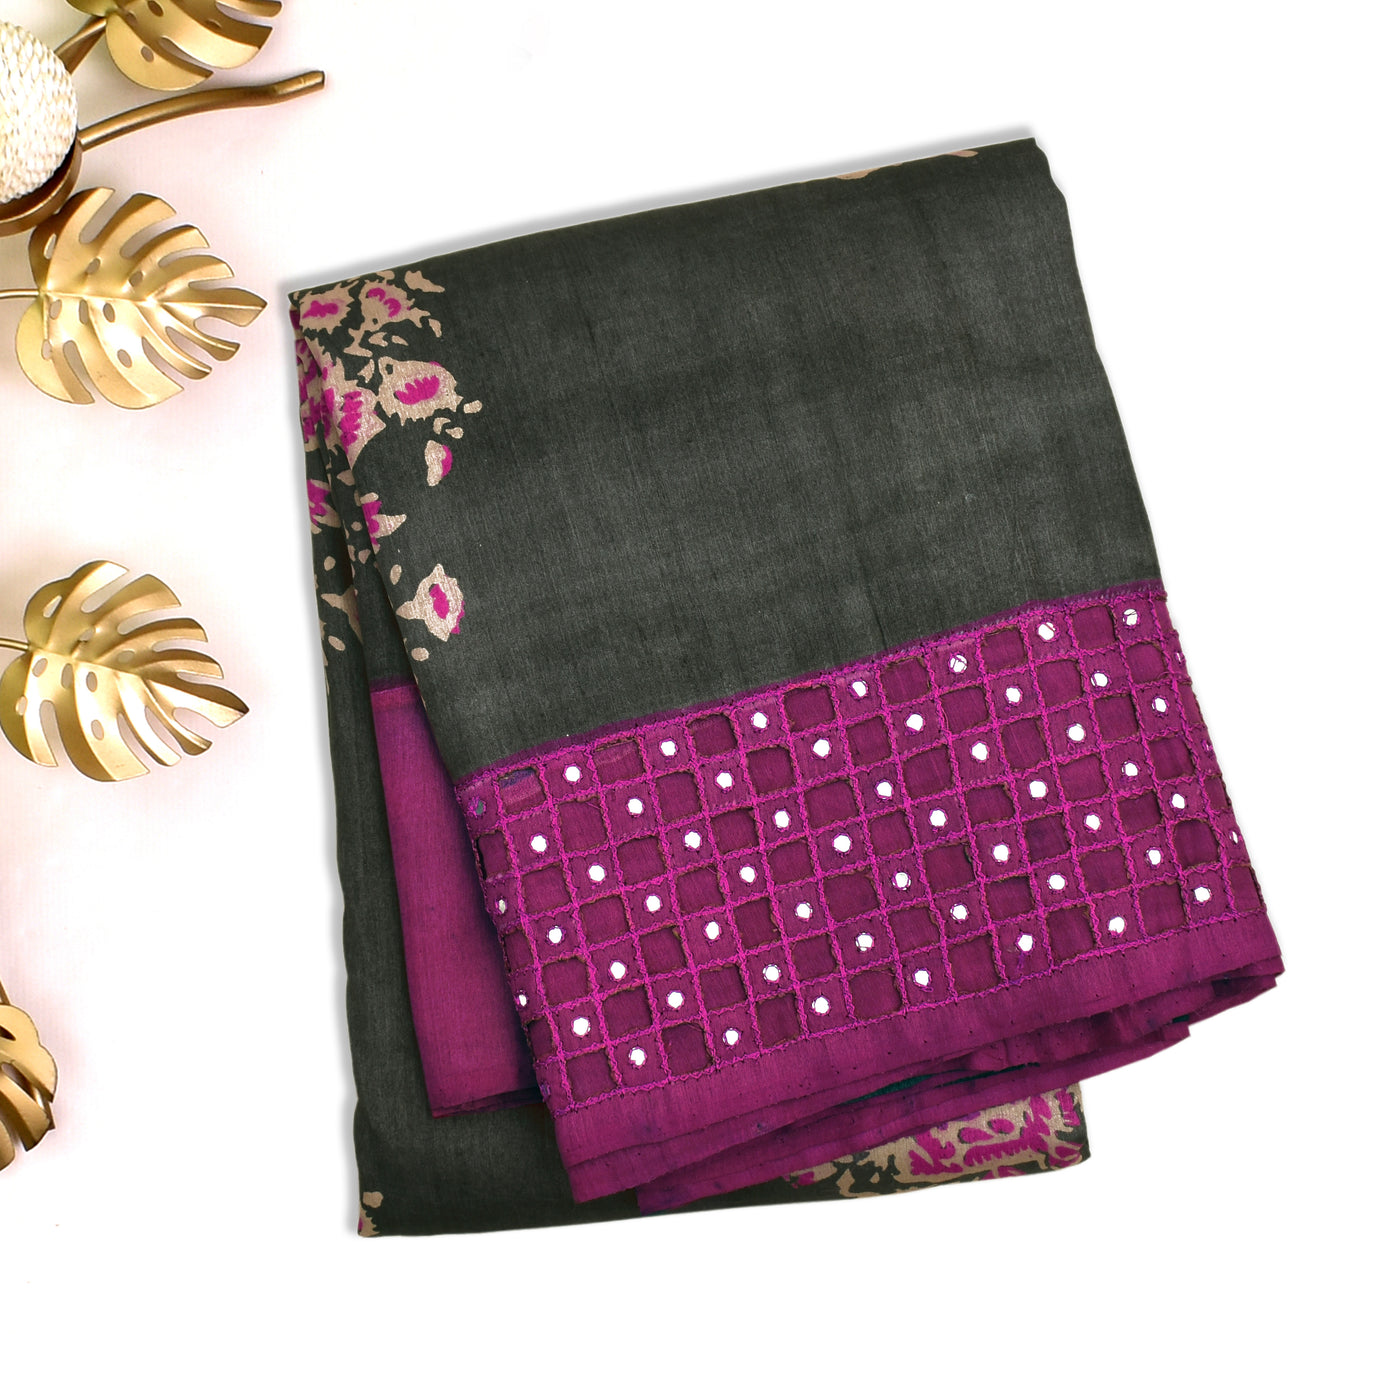 https://anyaonline.in/products/black-tussar-silk-saree-with-floral-printed-design